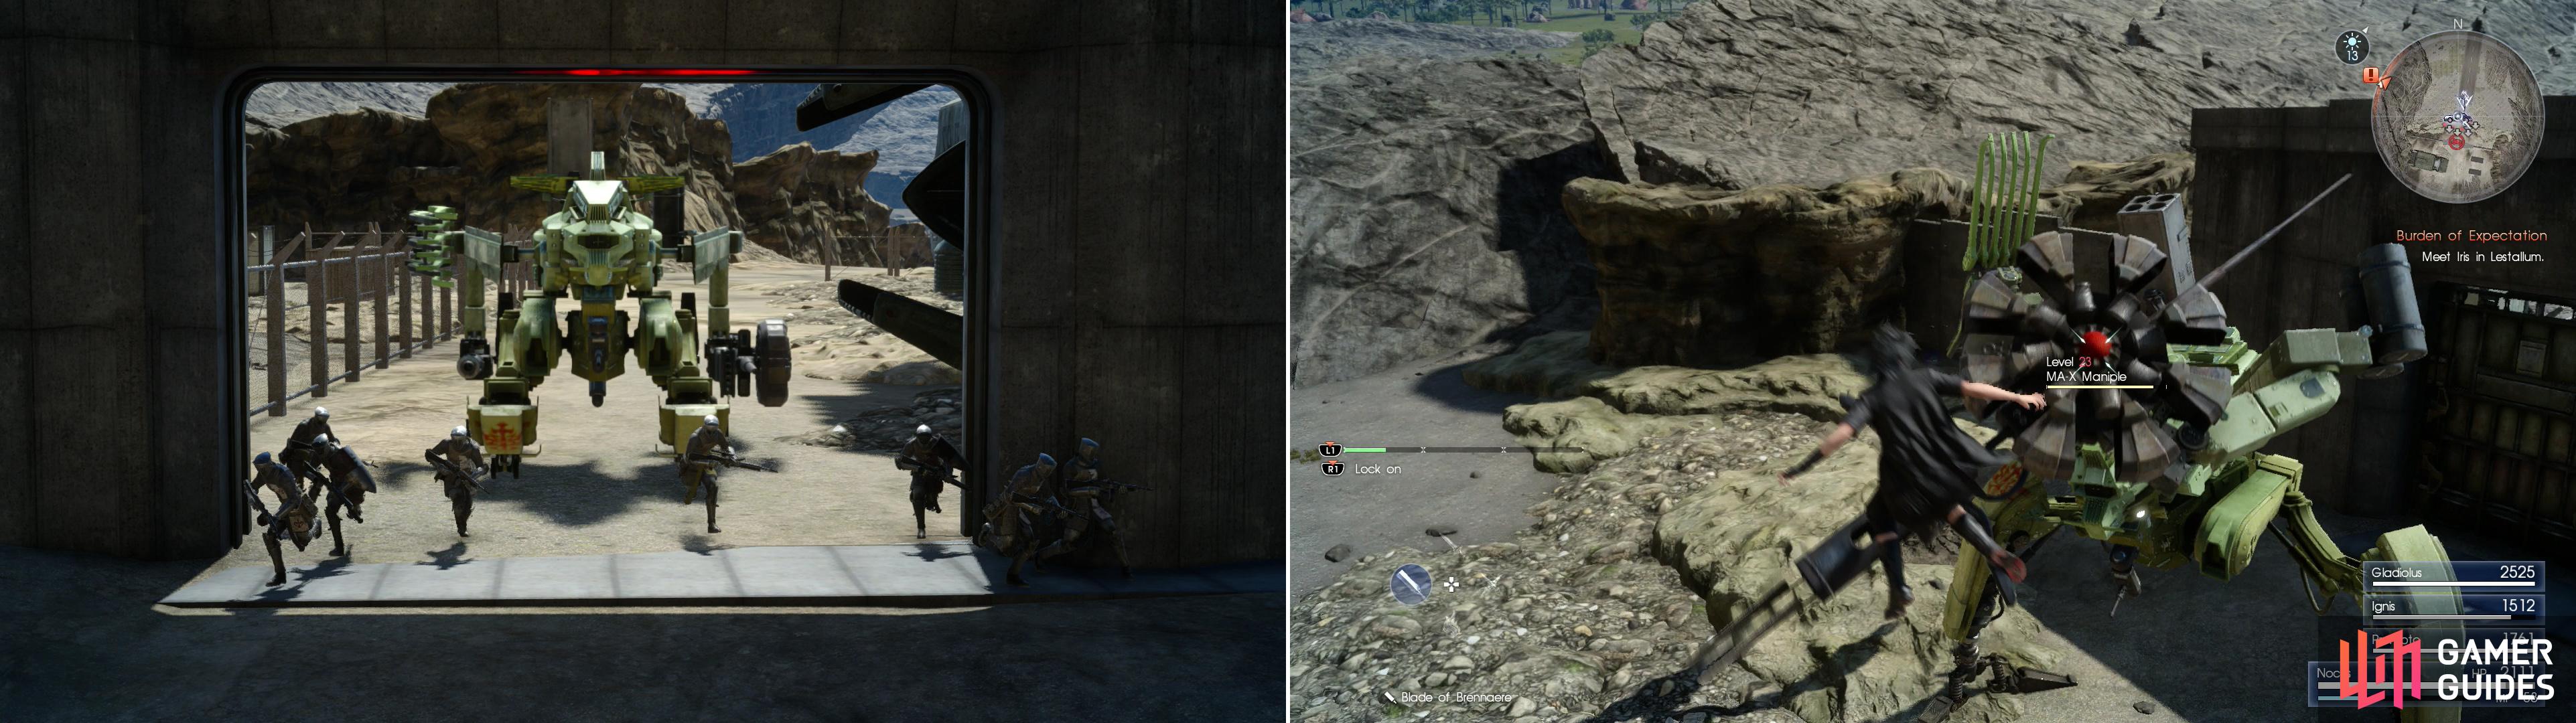 When you reach the entrance to the Disc of Cauthess you’ll be greeted by some occupying imperials (left), the real threat here is the MA X Maniple (right).